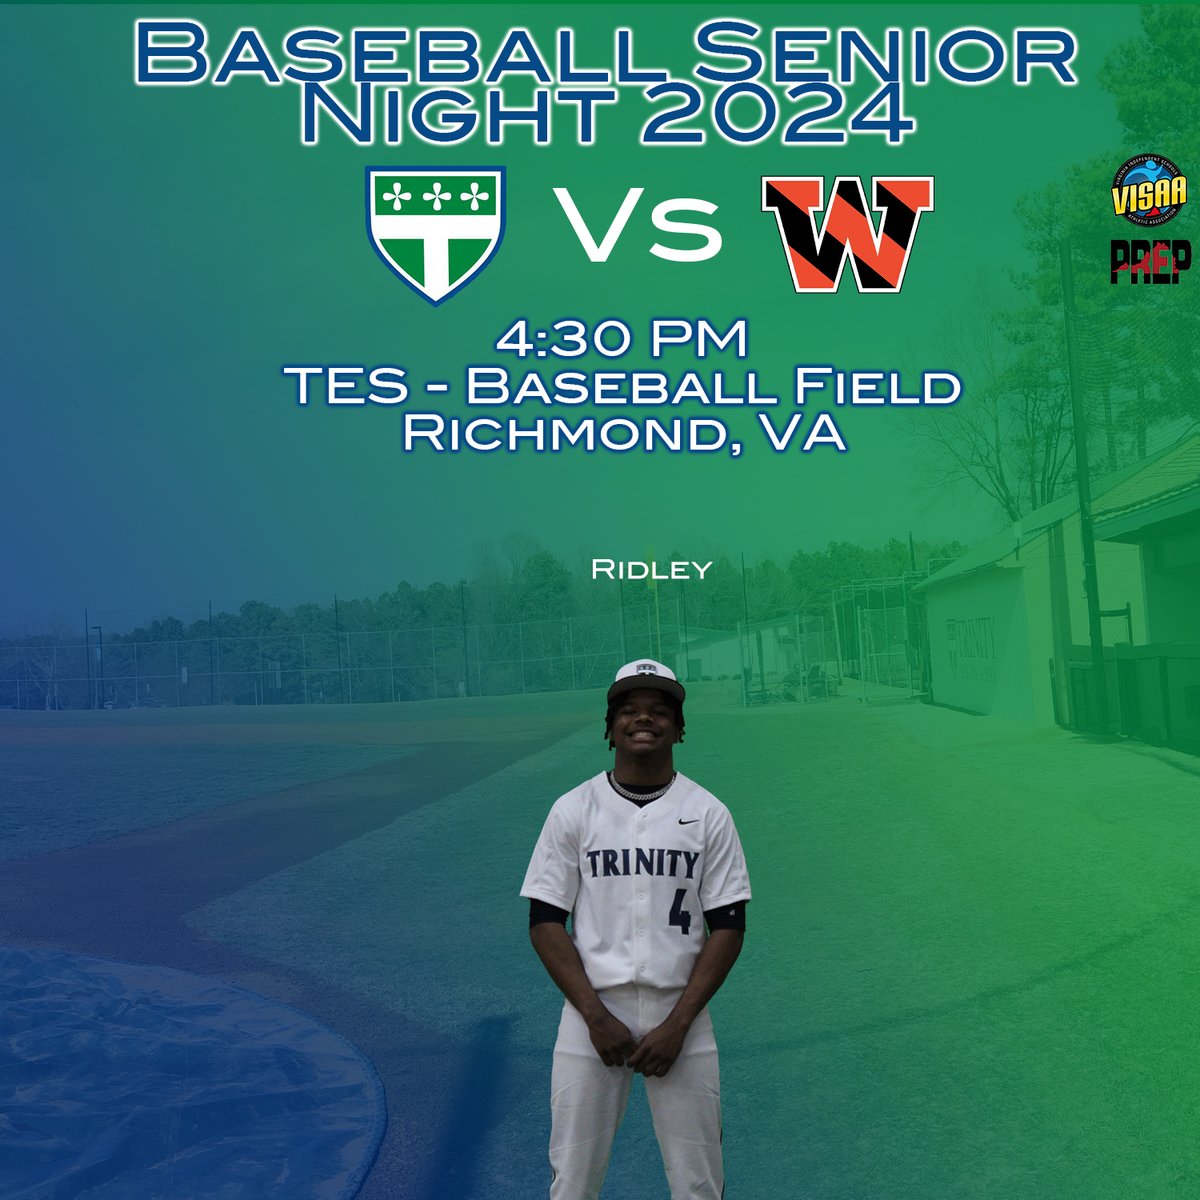 Come out for SENIOR NIGHT for Titan baseball! We celebrate our lone senior as the team looks to keep the winning streak going Let's Go Titans!